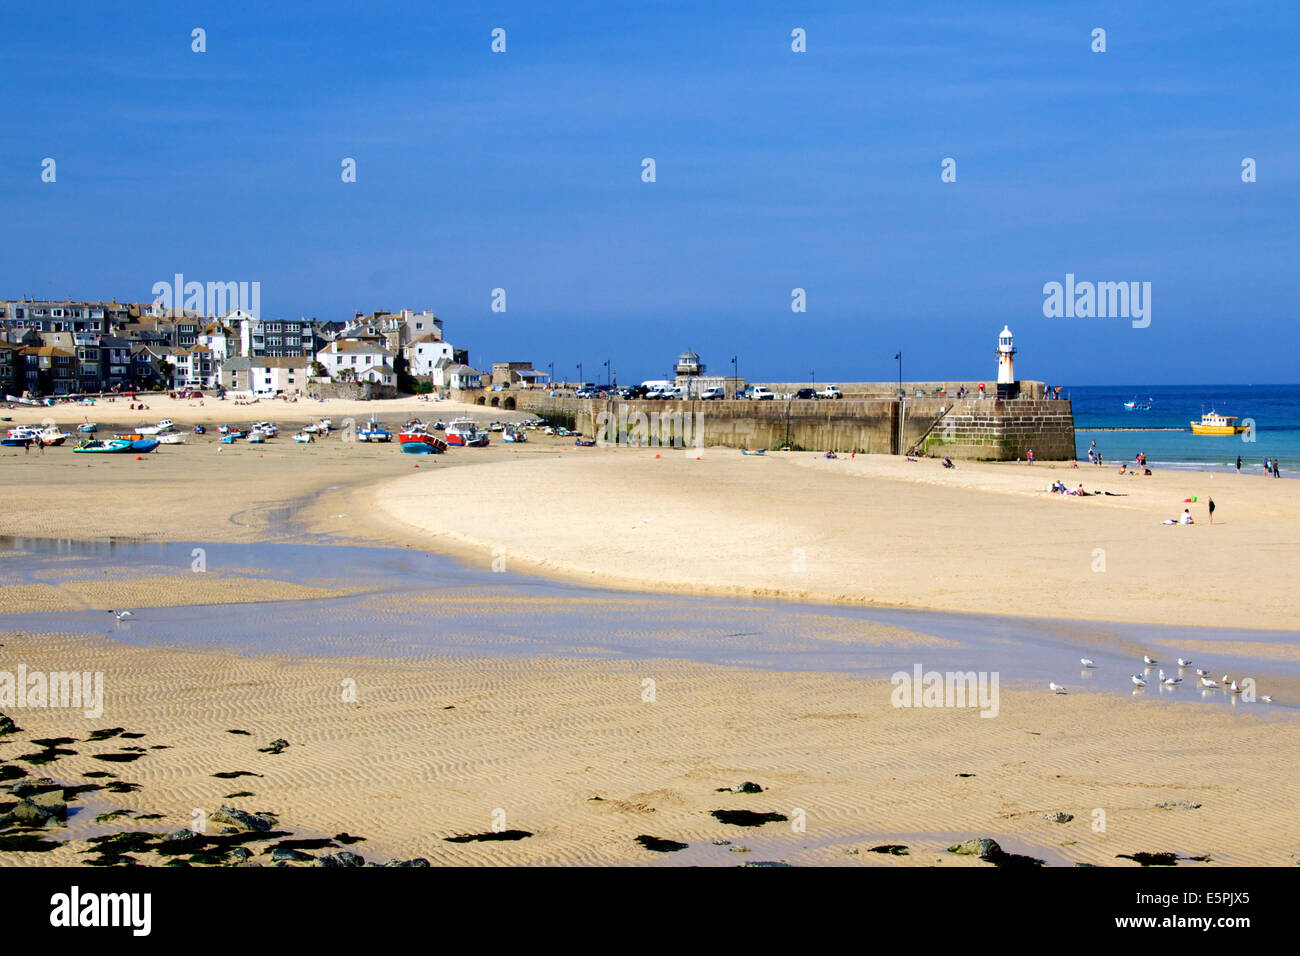 Landscape of St Ives Harbour Cornwall England in low tide showing beach Pier lighthouse town sandbar in bright sunshine Stock Photo